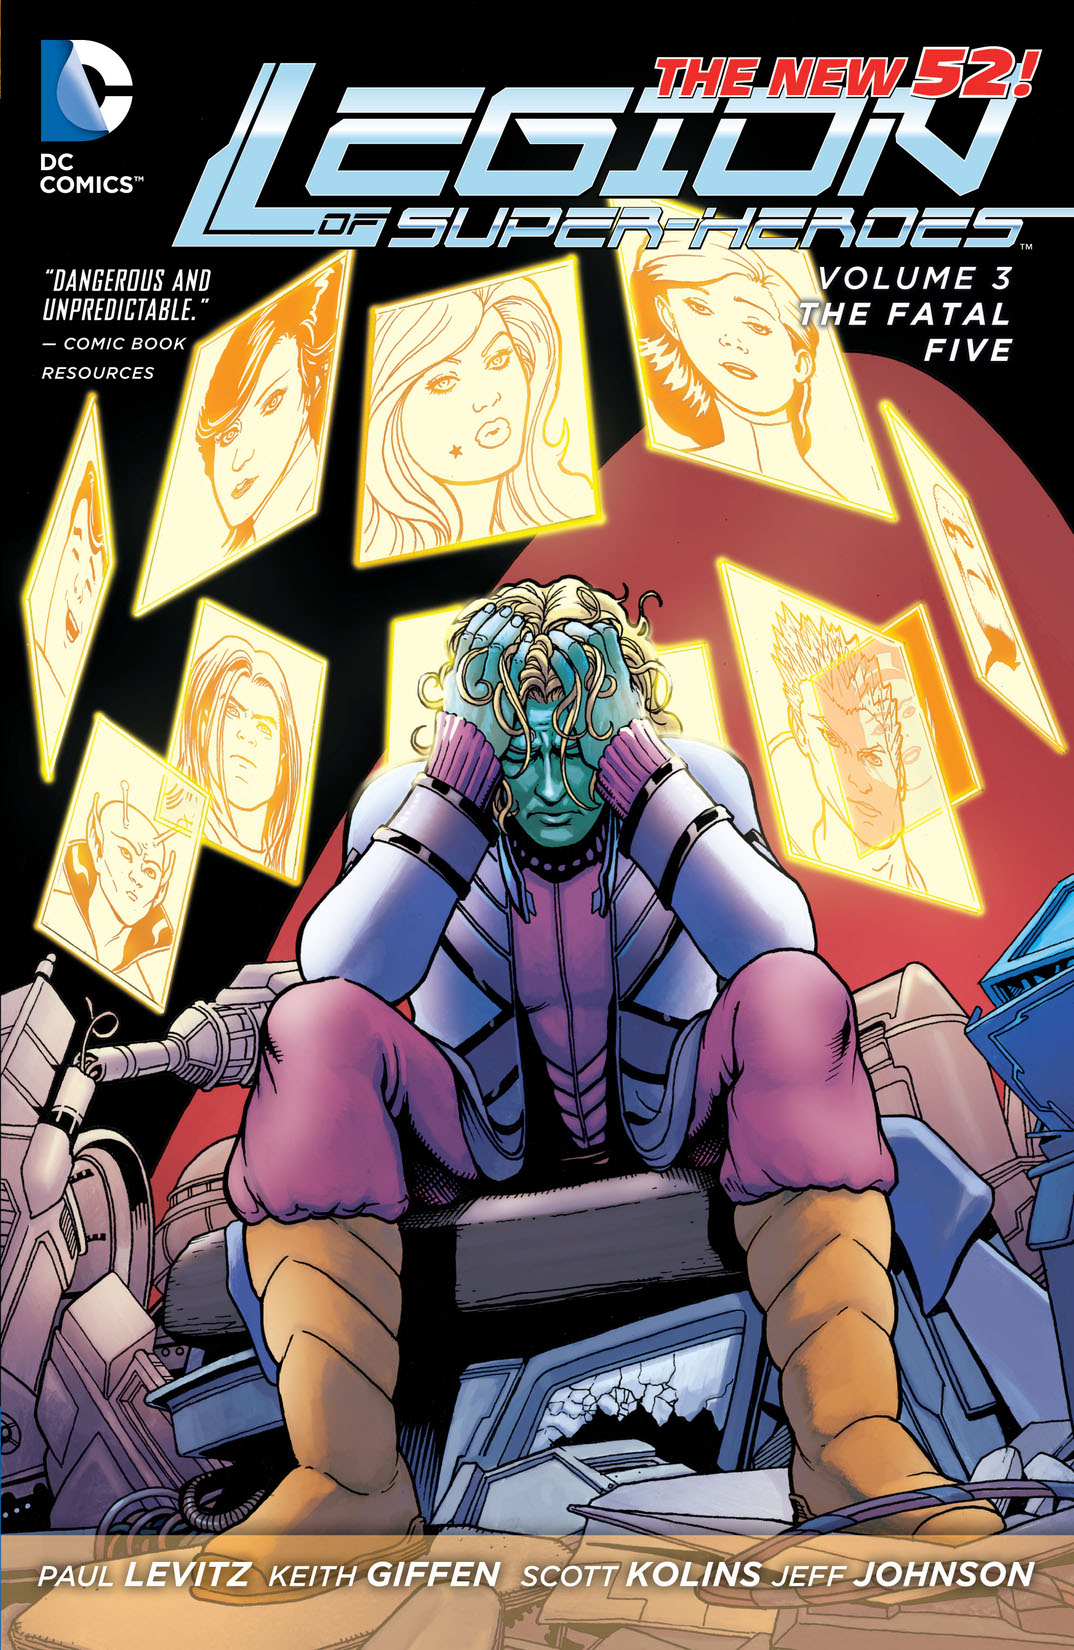 Legion of Super-Heroes Vol. 3: The Fatal Five preview images